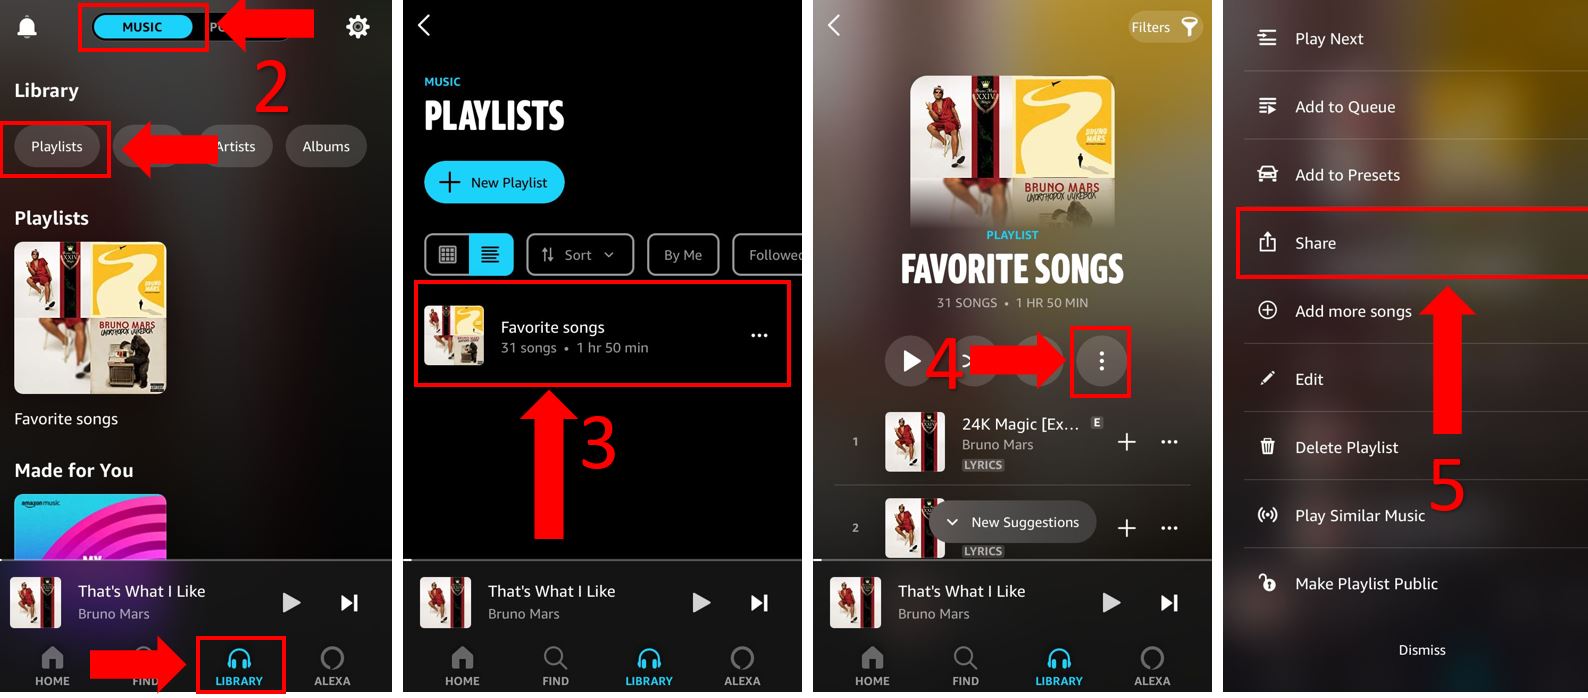 How to share playlists on Amazon Music